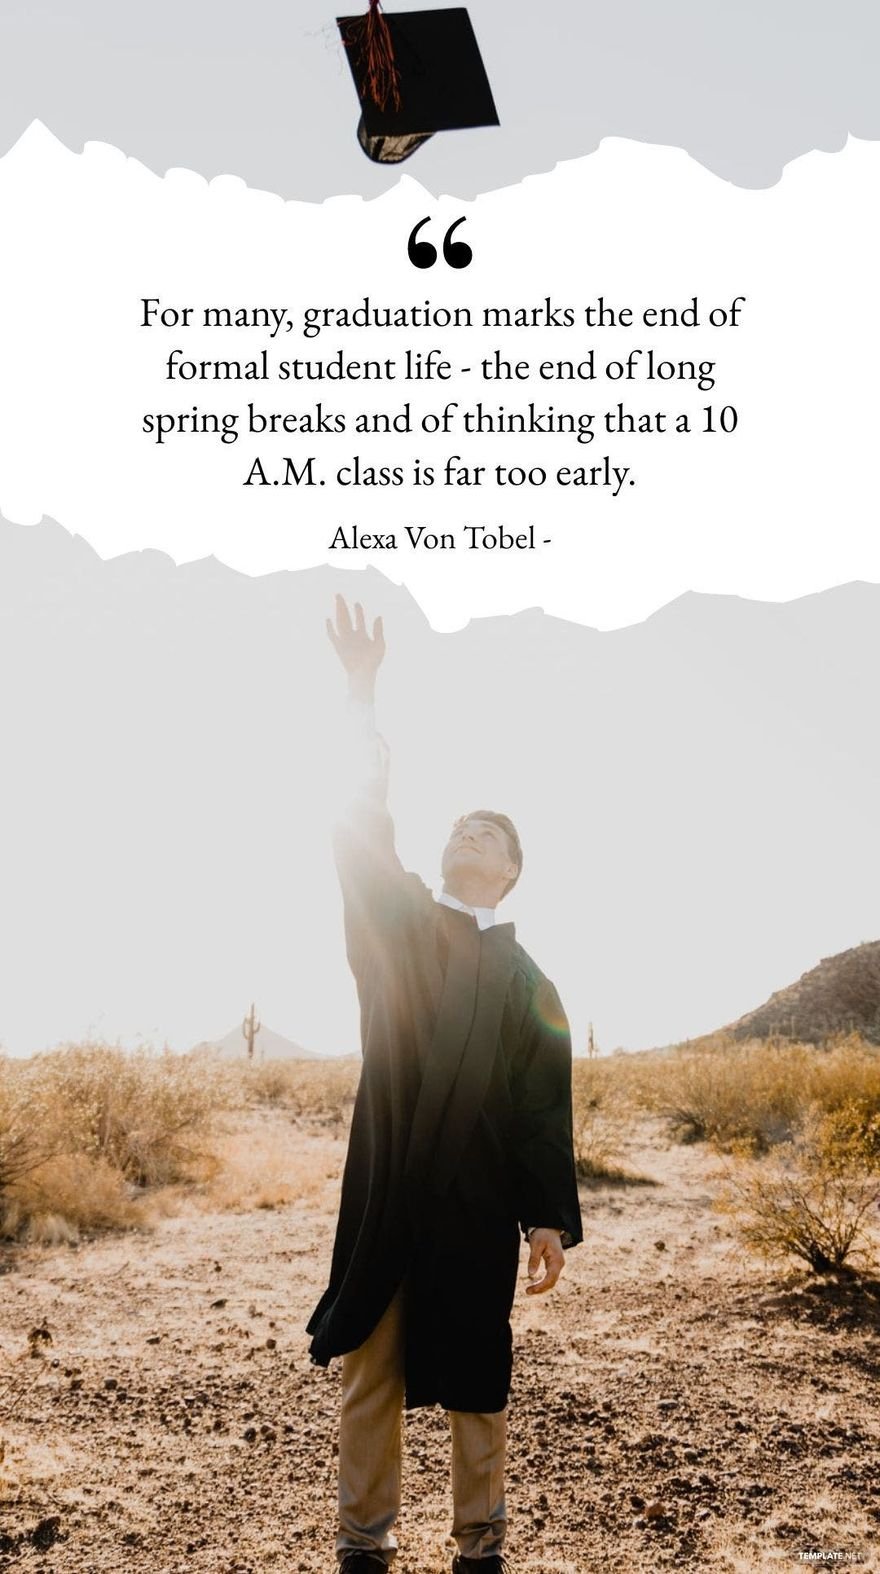 Alexa Von Tobe - For many, graduation marks the end of formal student life - the end of long spring breaks and of thinking that a 10 A.M. class is far too early.